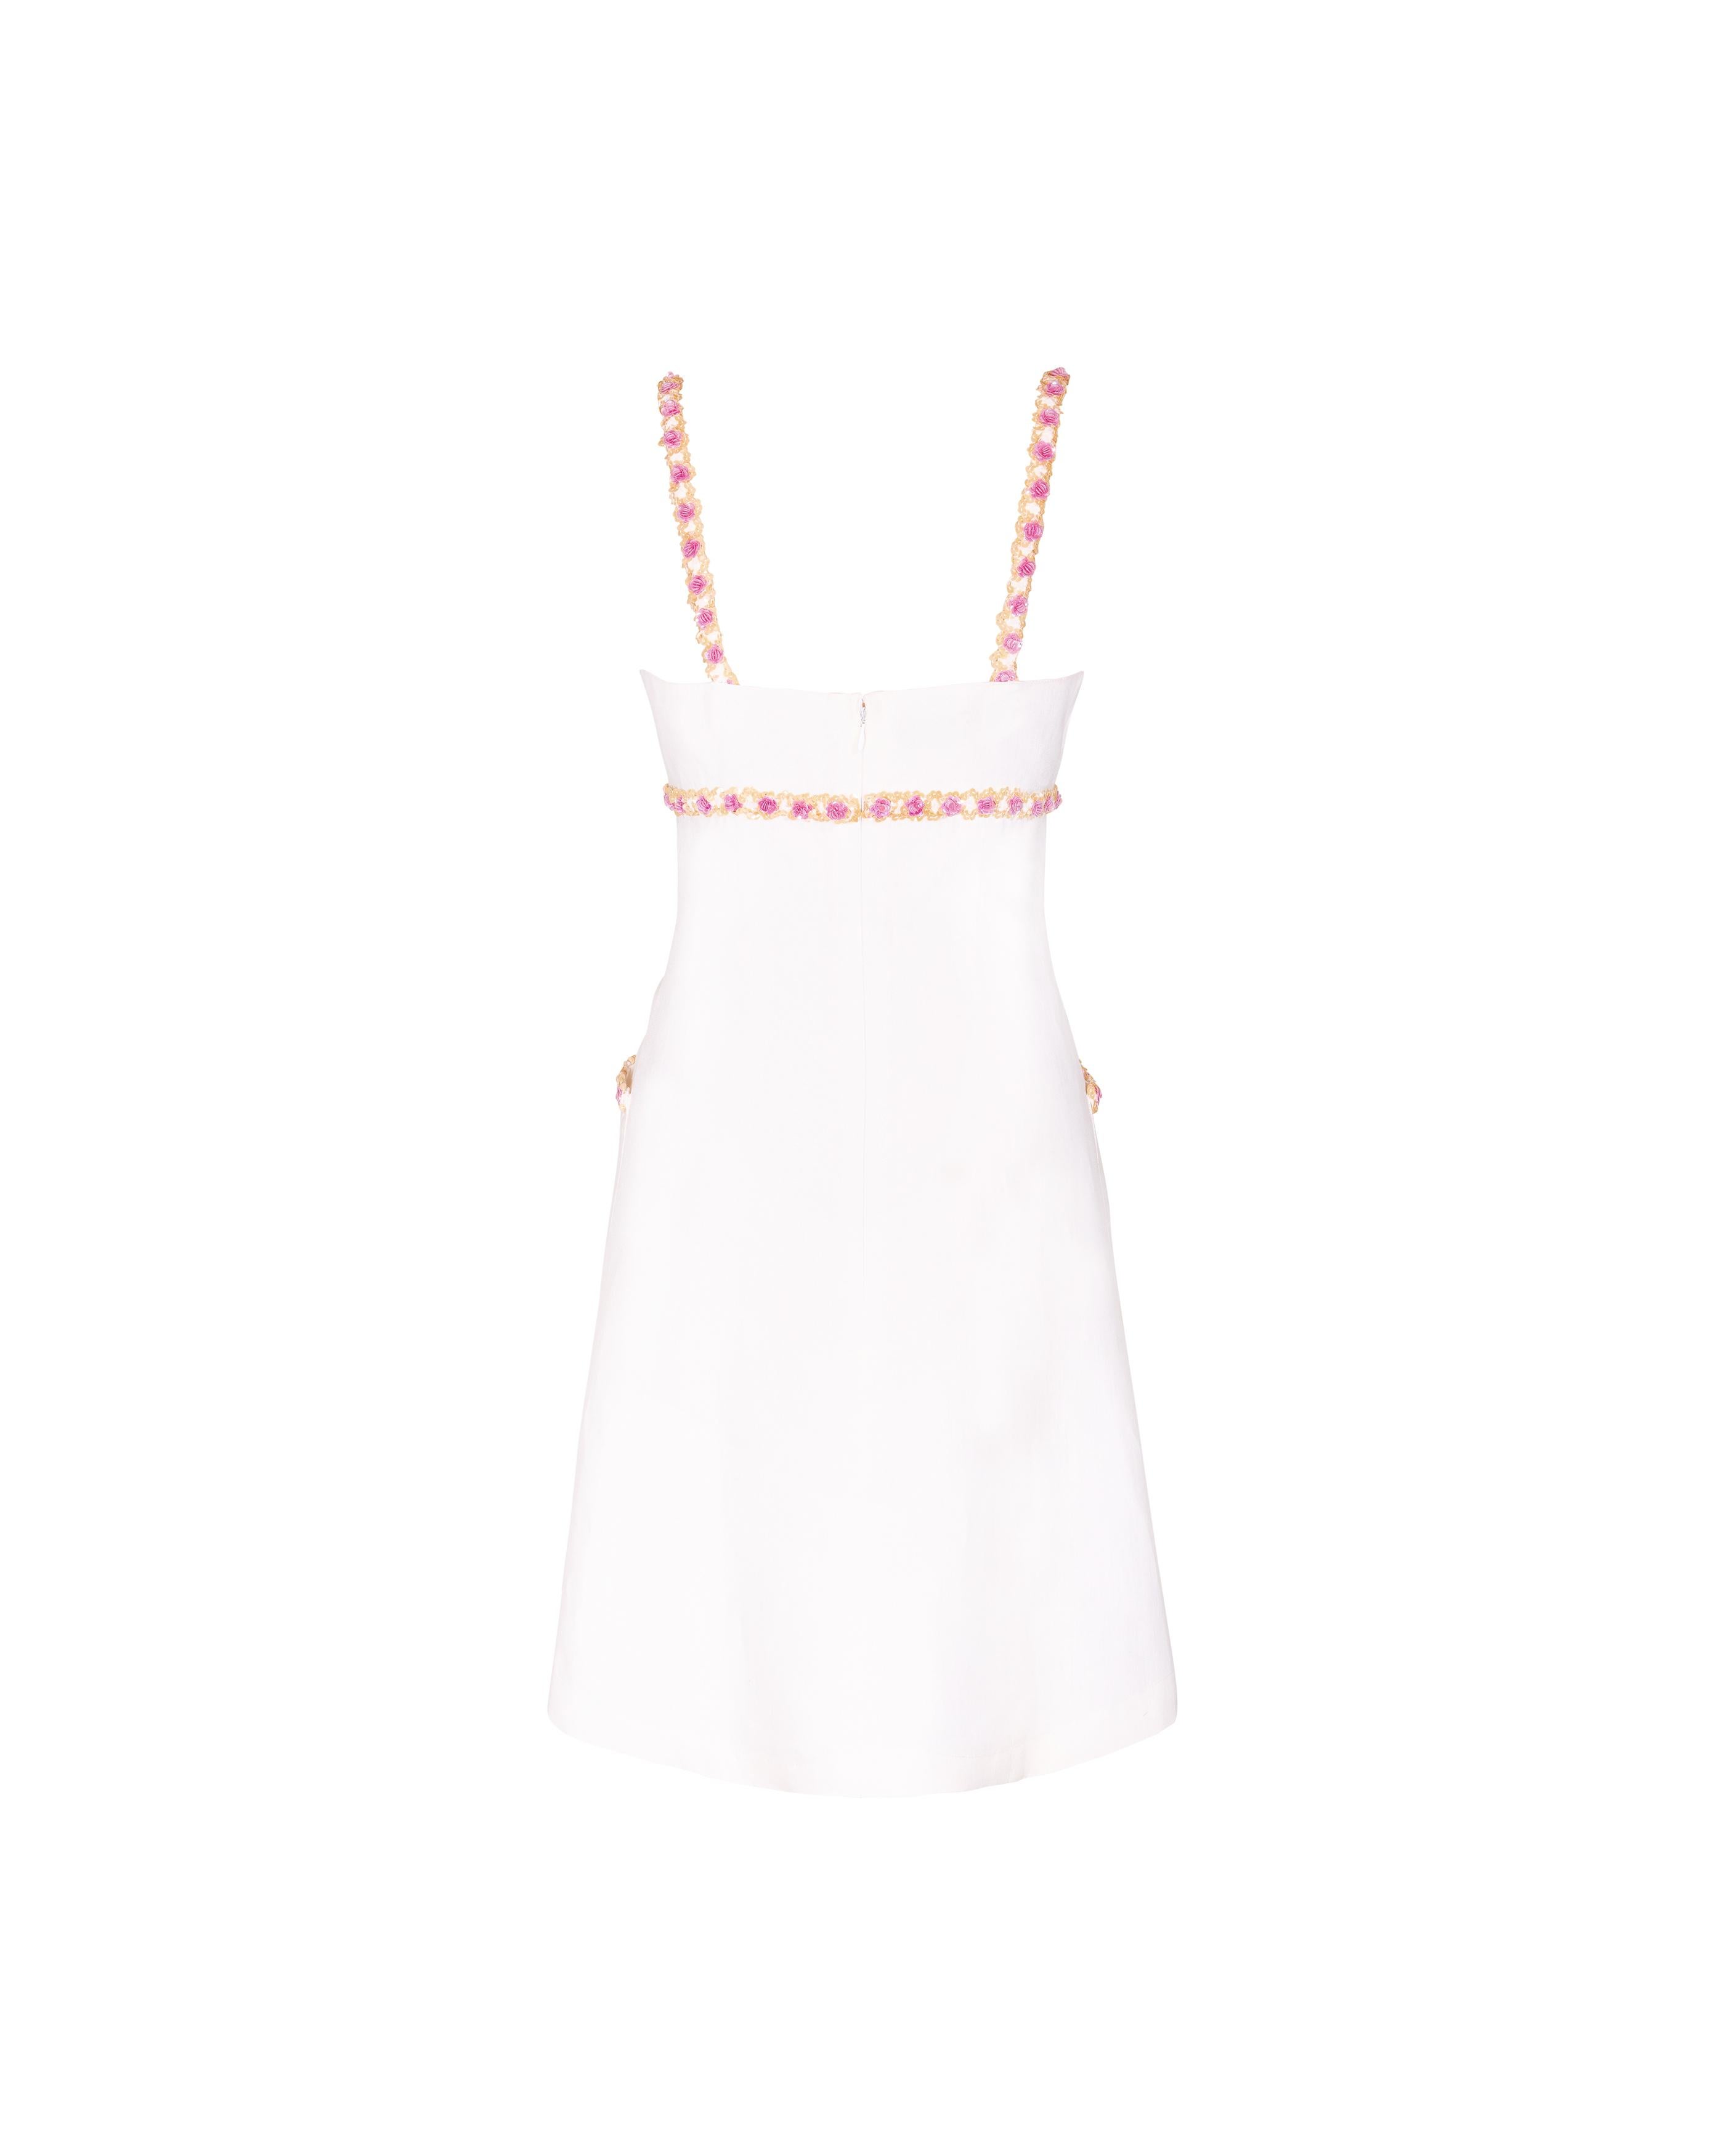 S/S 1996 Chanel by Karl Lagerfeld White Linen Mini Dress with 3D Floral Trim In Good Condition In North Hollywood, CA